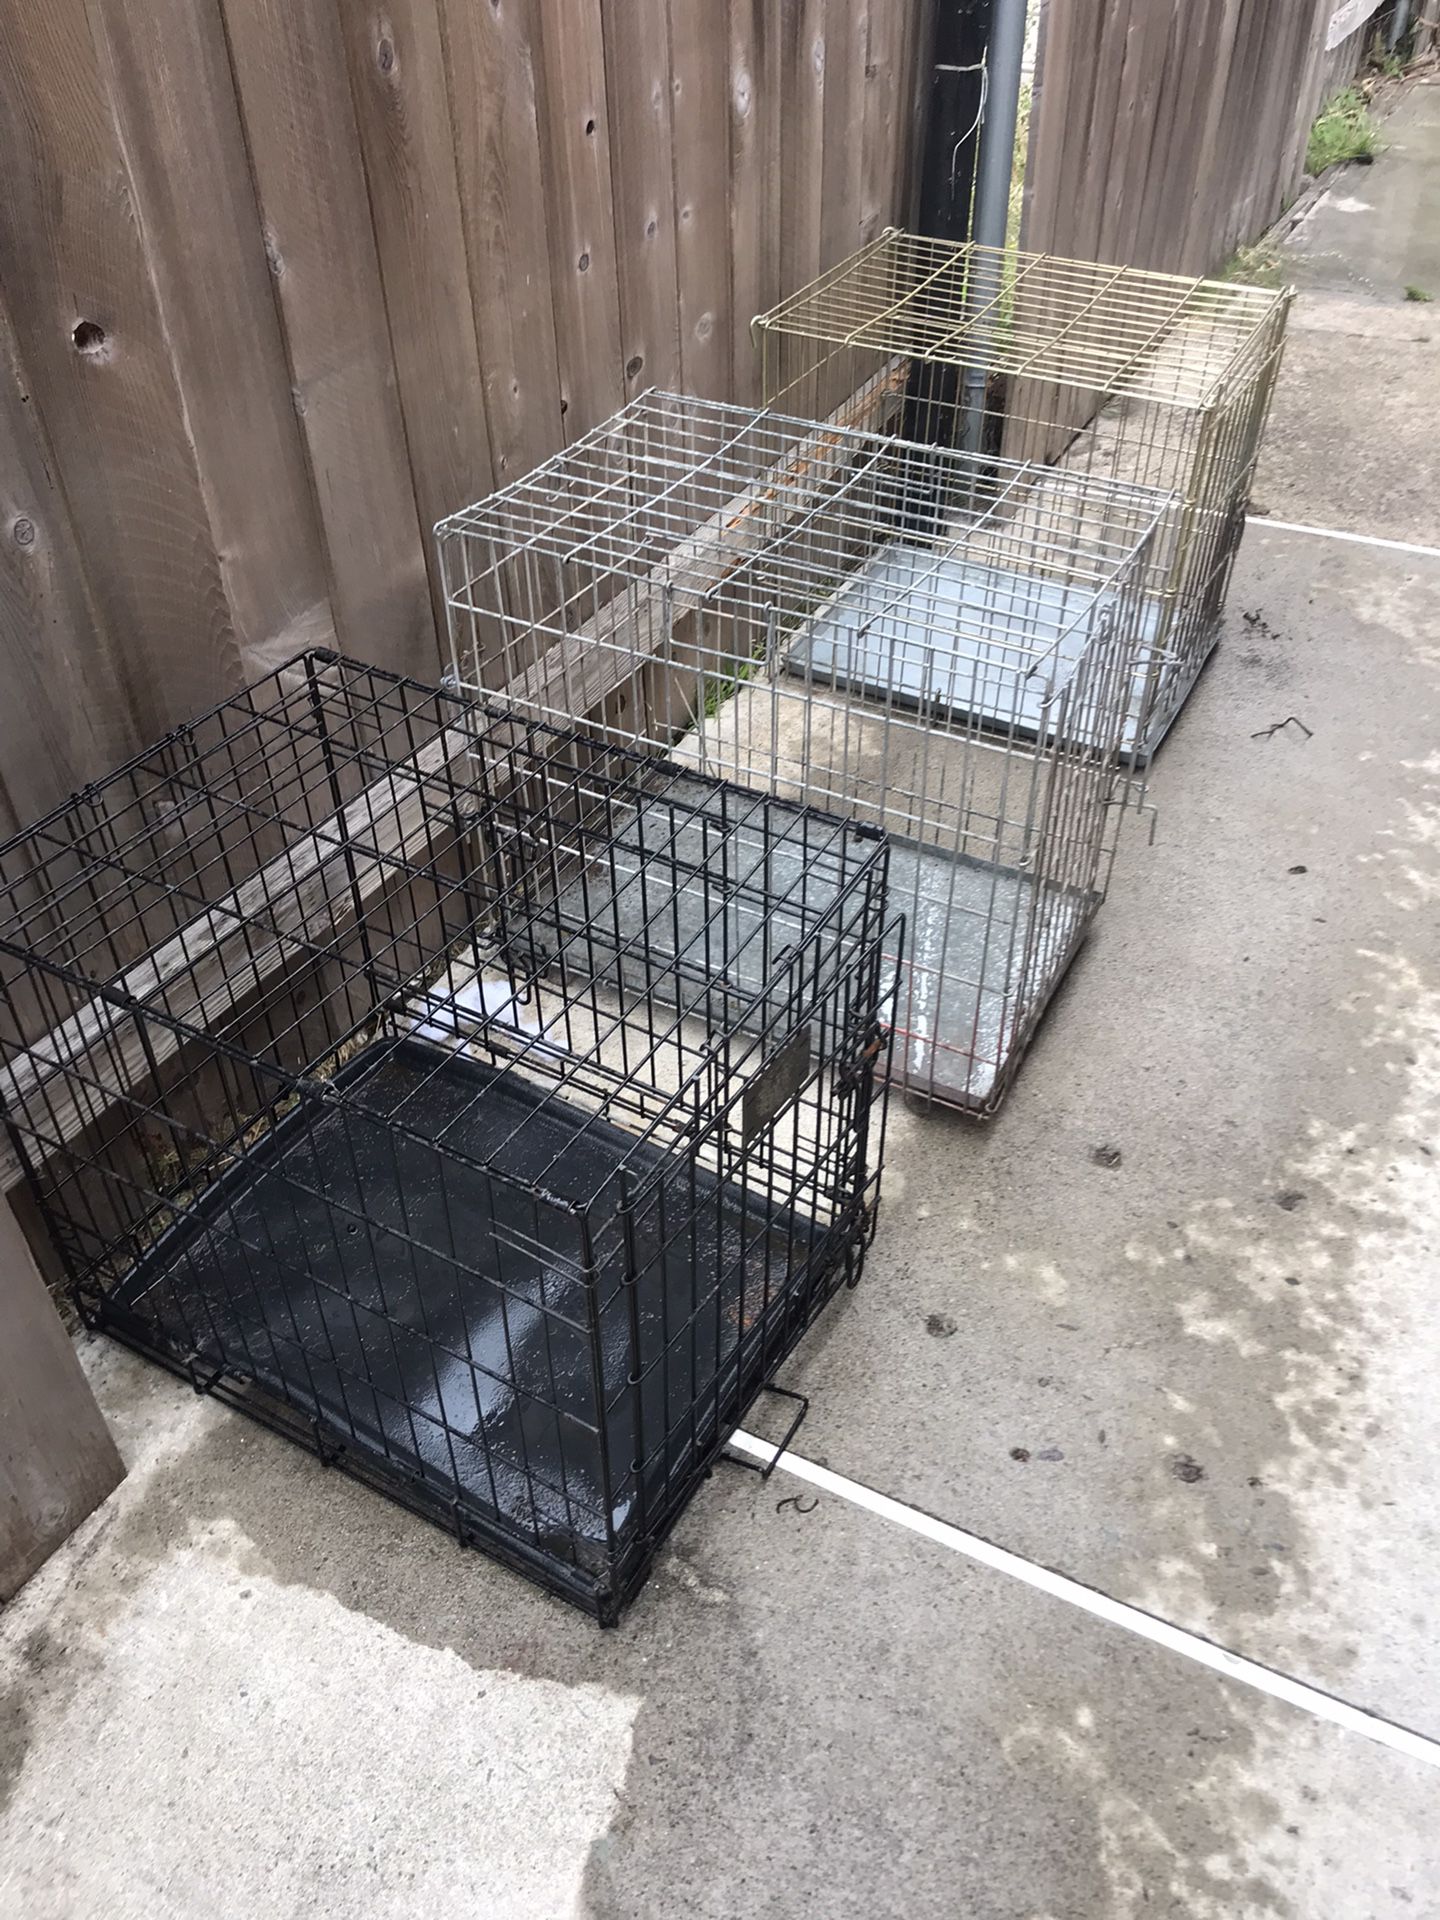 3 Dog Cages